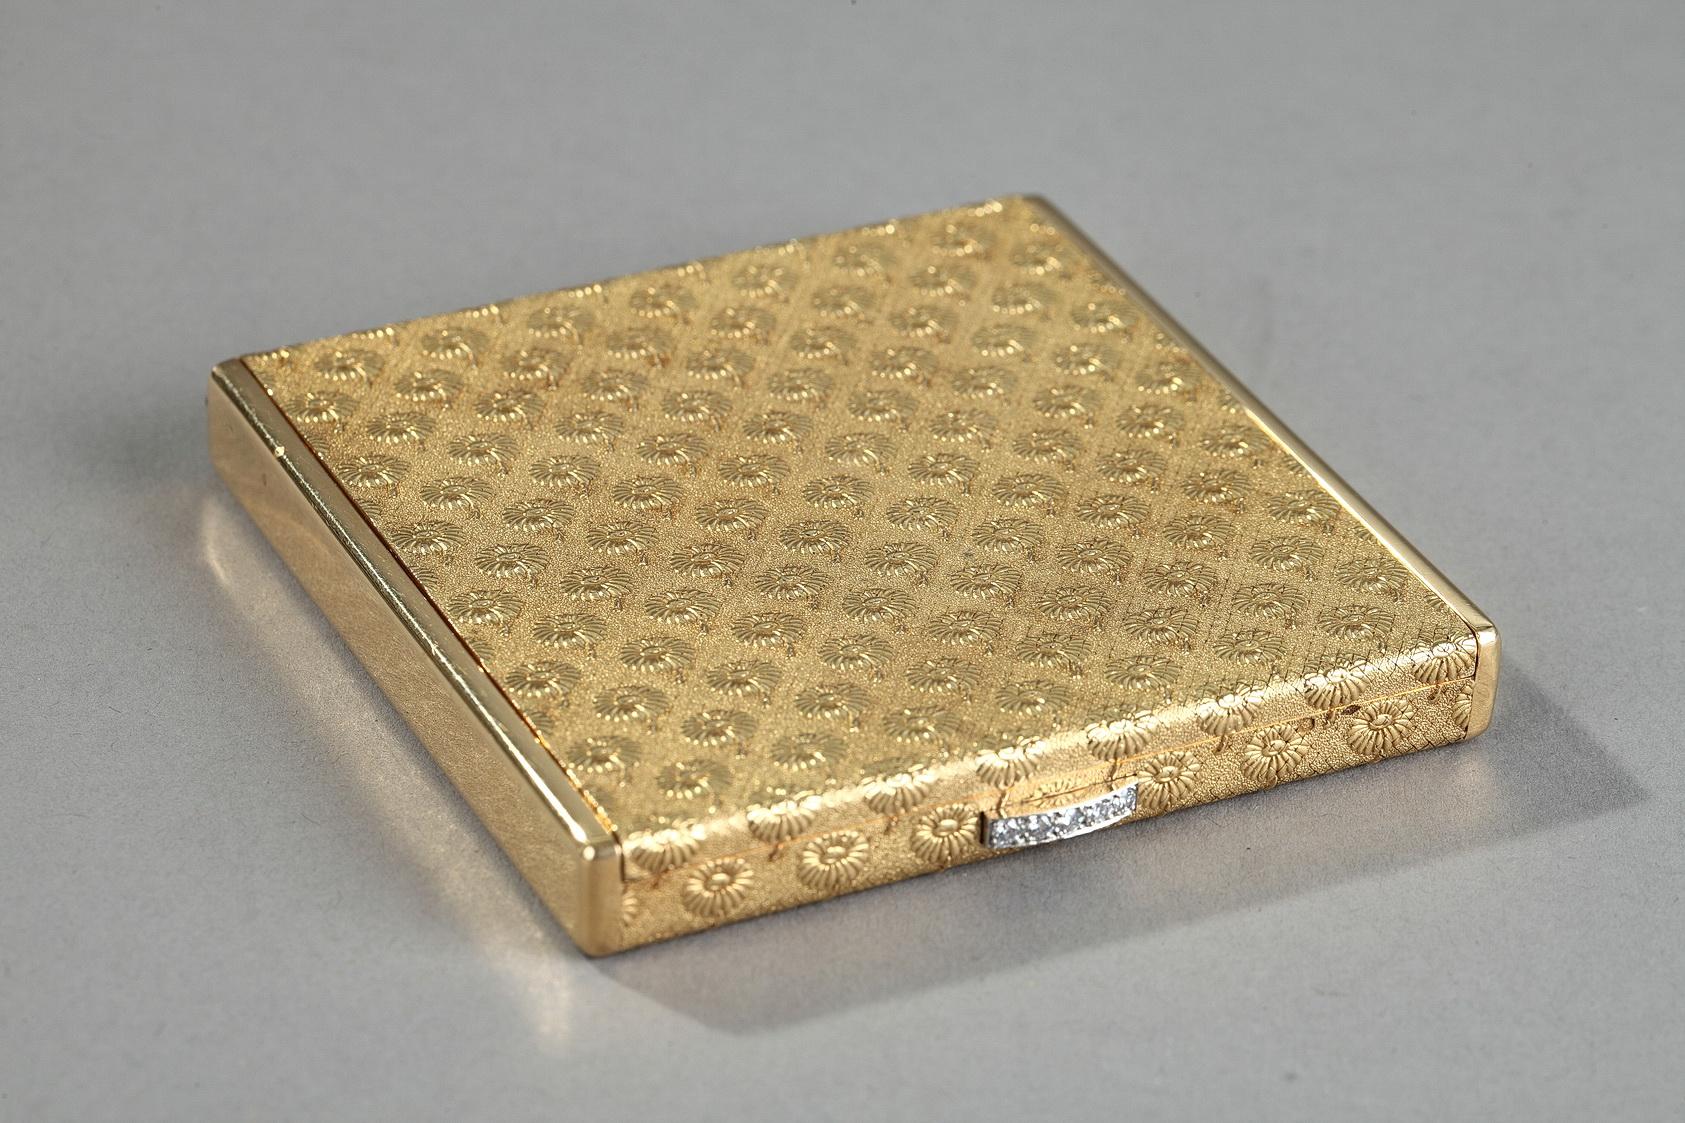 Chic 18K yellow gold powder box from the 